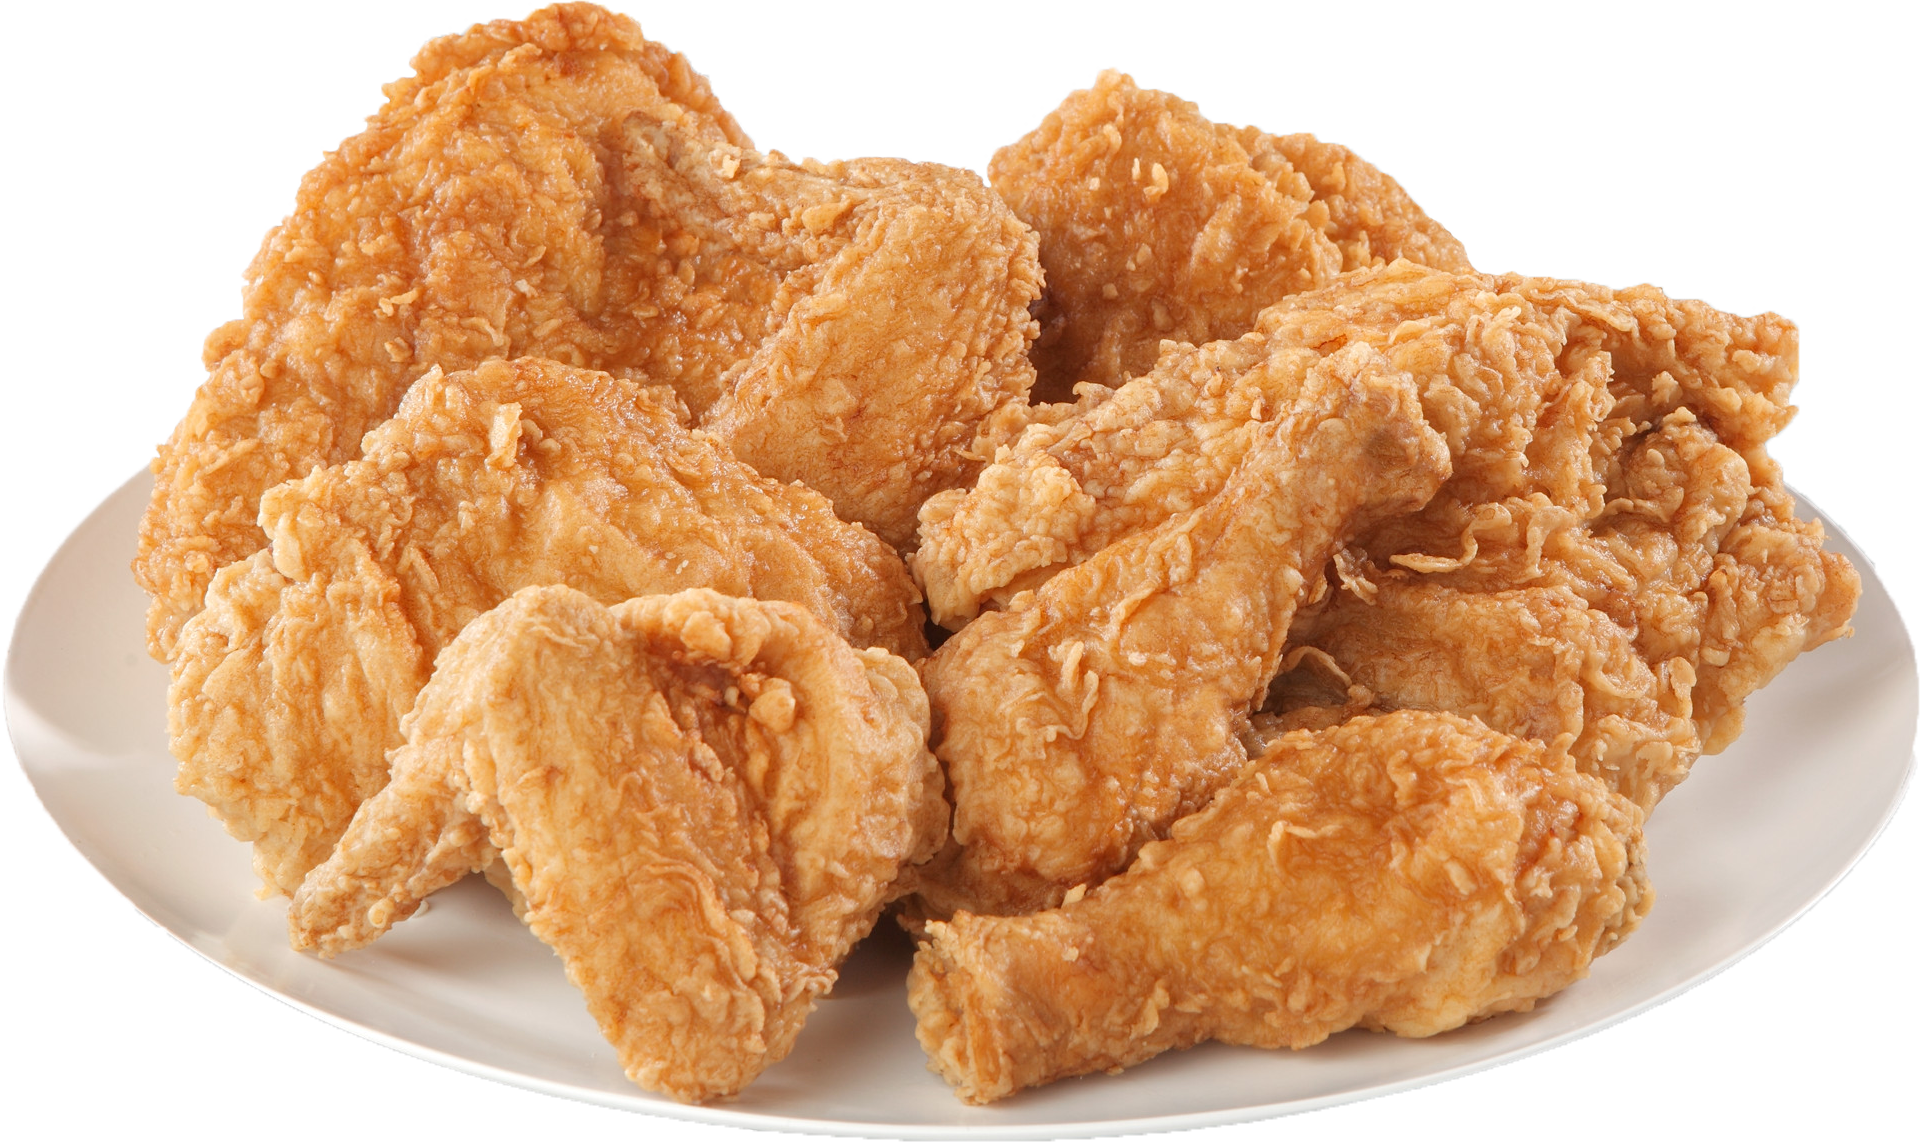 fried chicken, fry food png transparent fry food images pluspng #15413